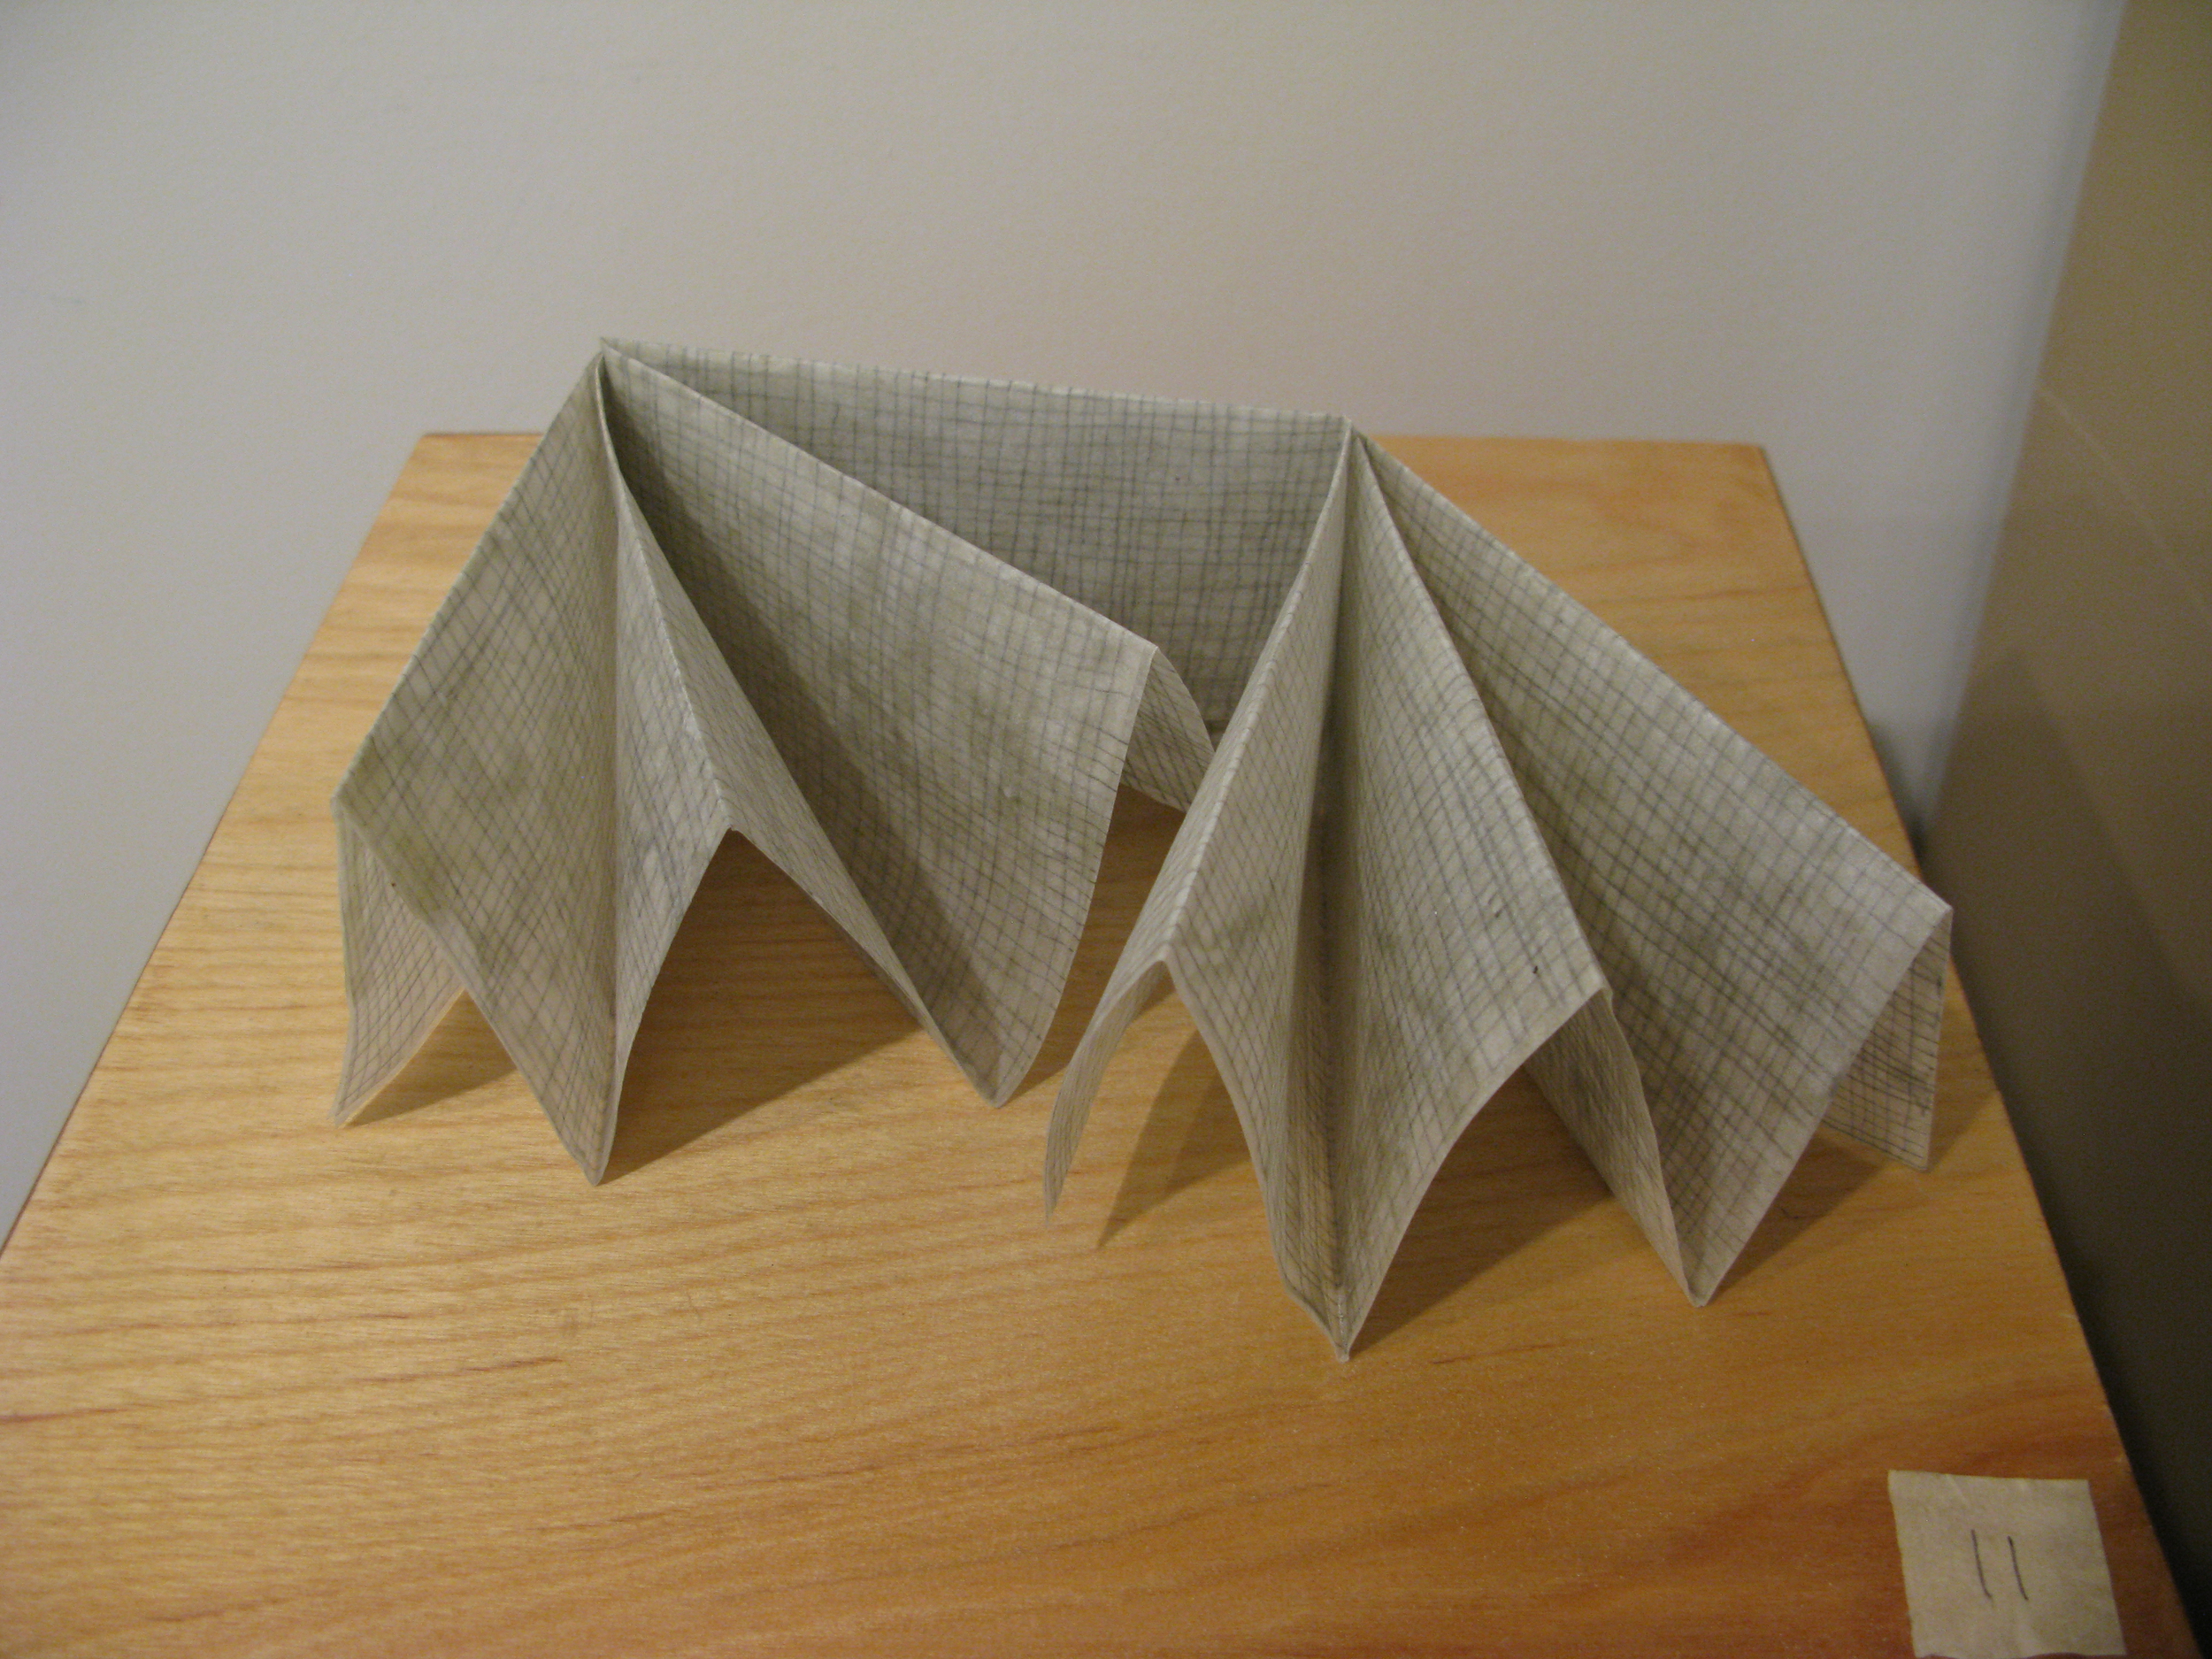  Untitled  layered vellum bonded with beeswax, graphite  8 x 3 x 6 in.  2012 